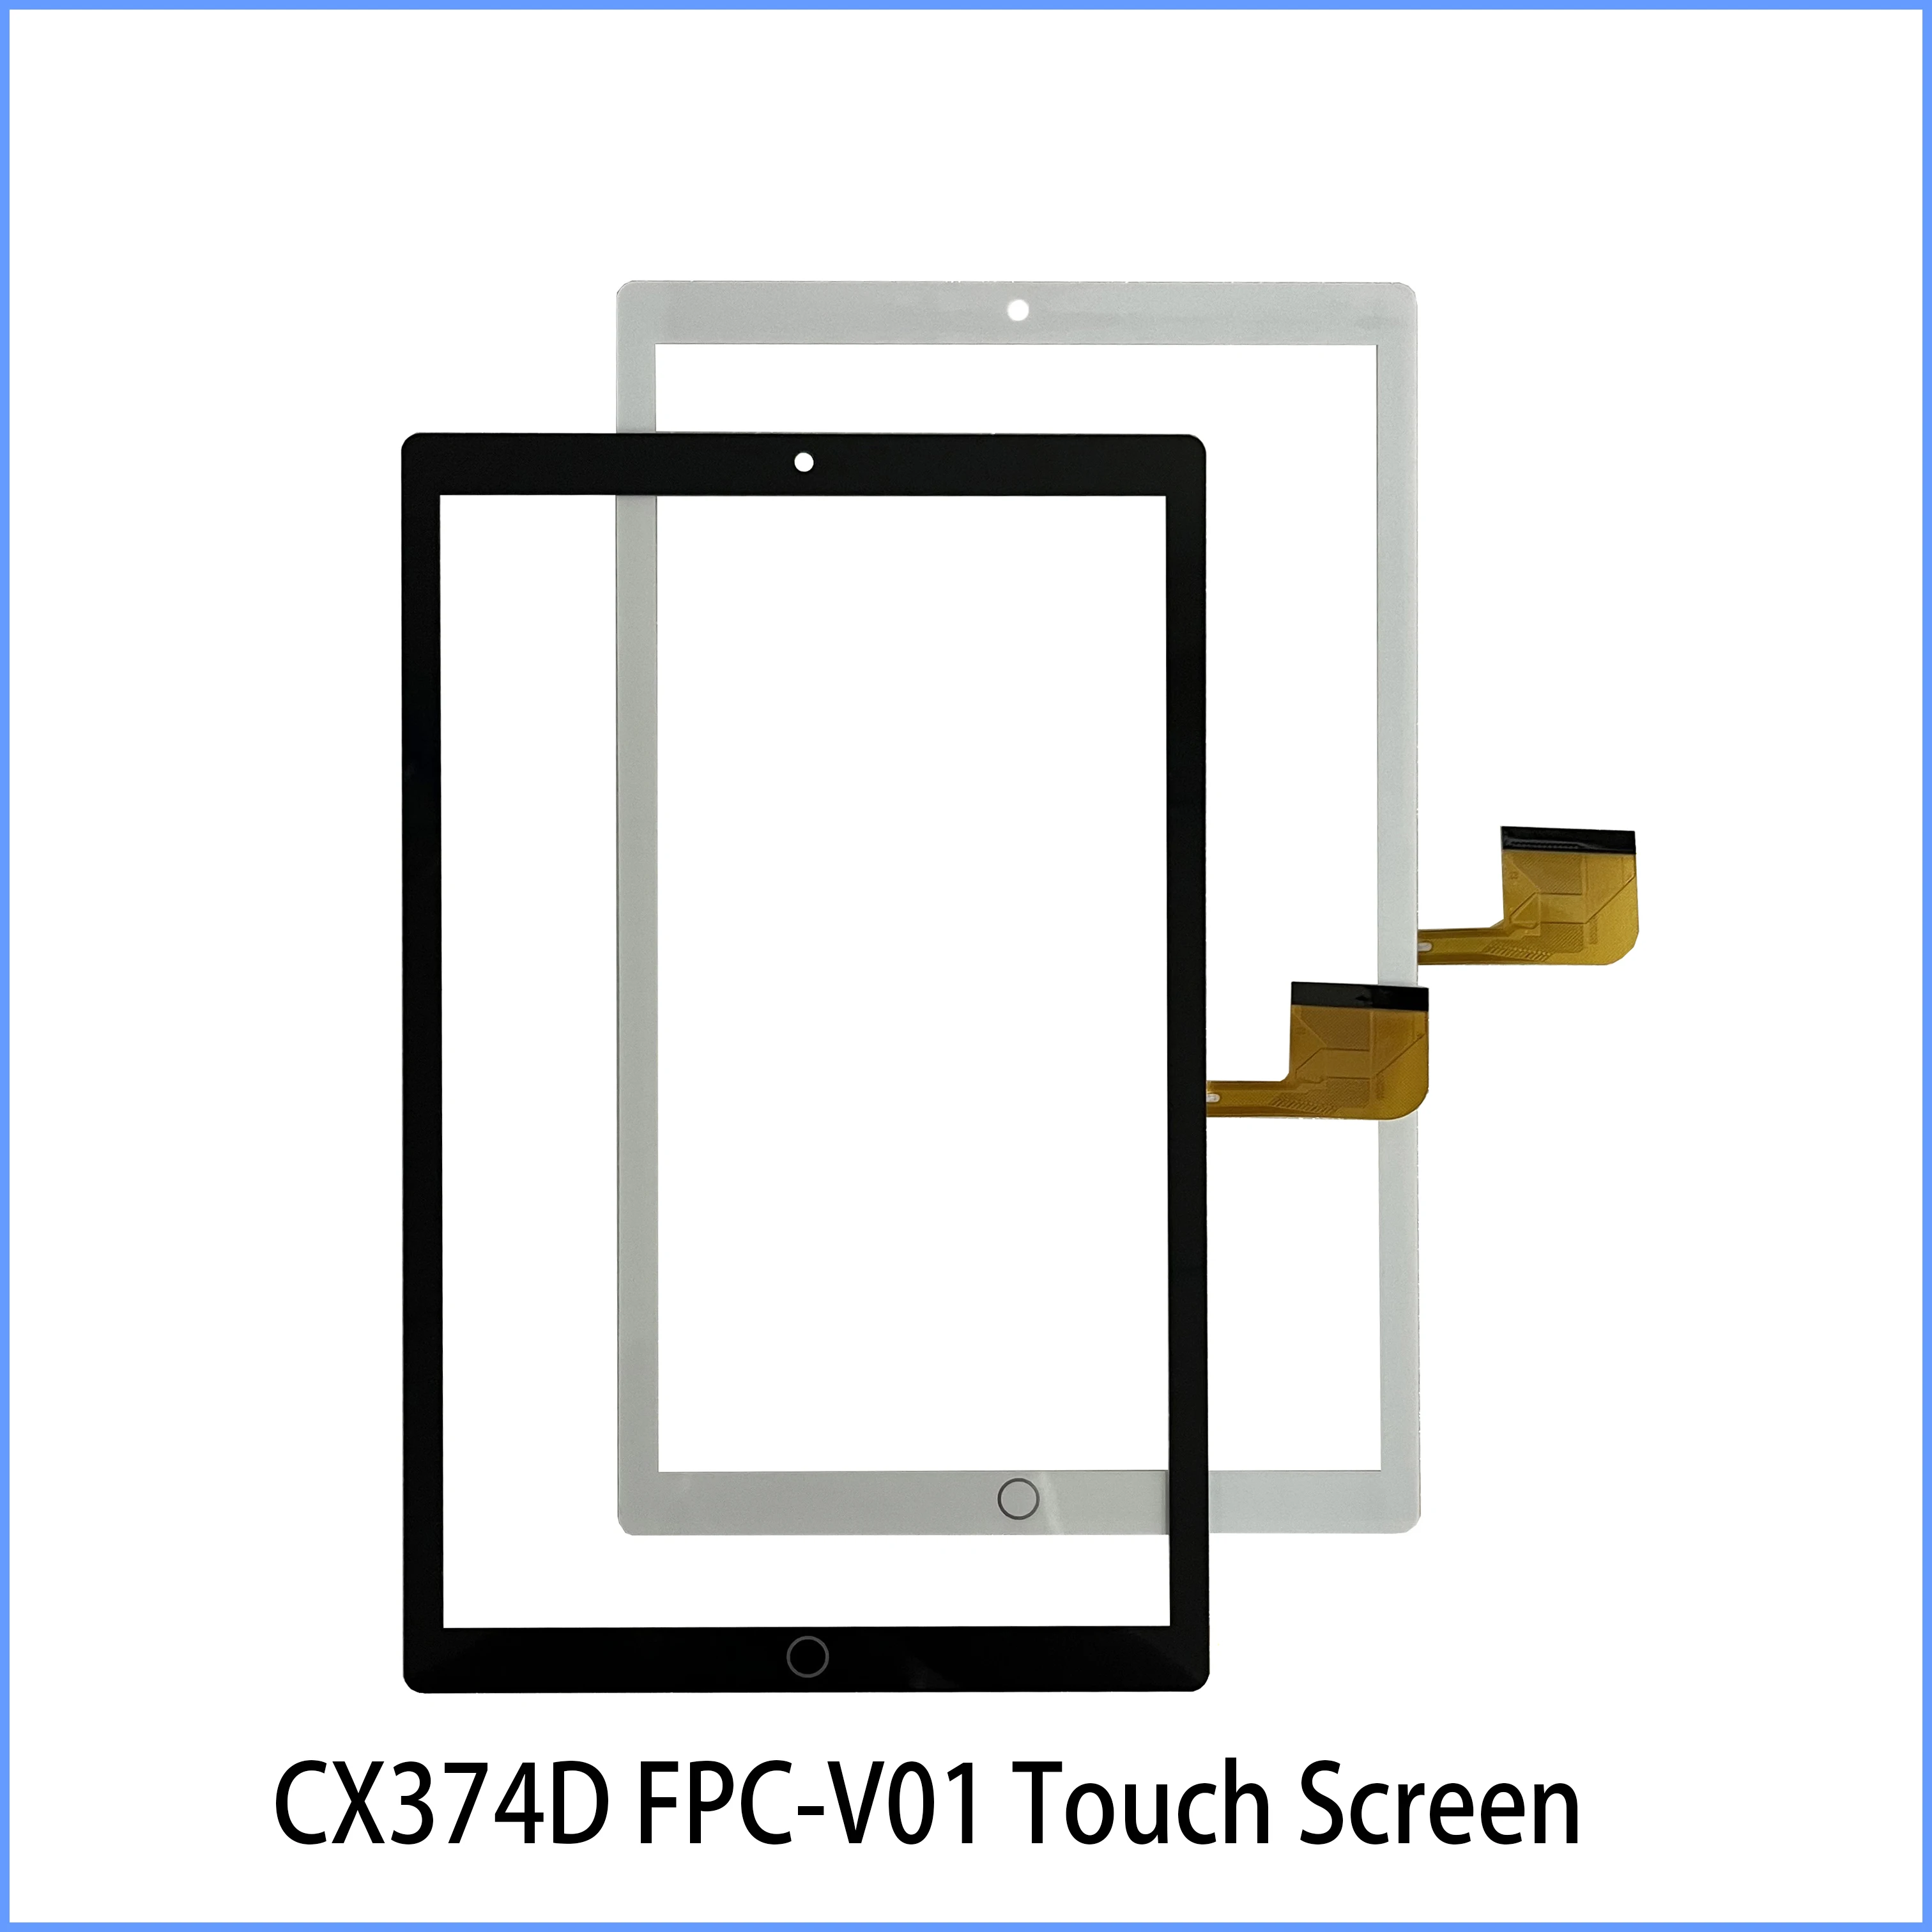 

New For 10.1'' inch CX374D FPC-V01 Tablet External Capacitive Touch Screen Digitizer Panel Sensor Replacement Phablet Multitouch